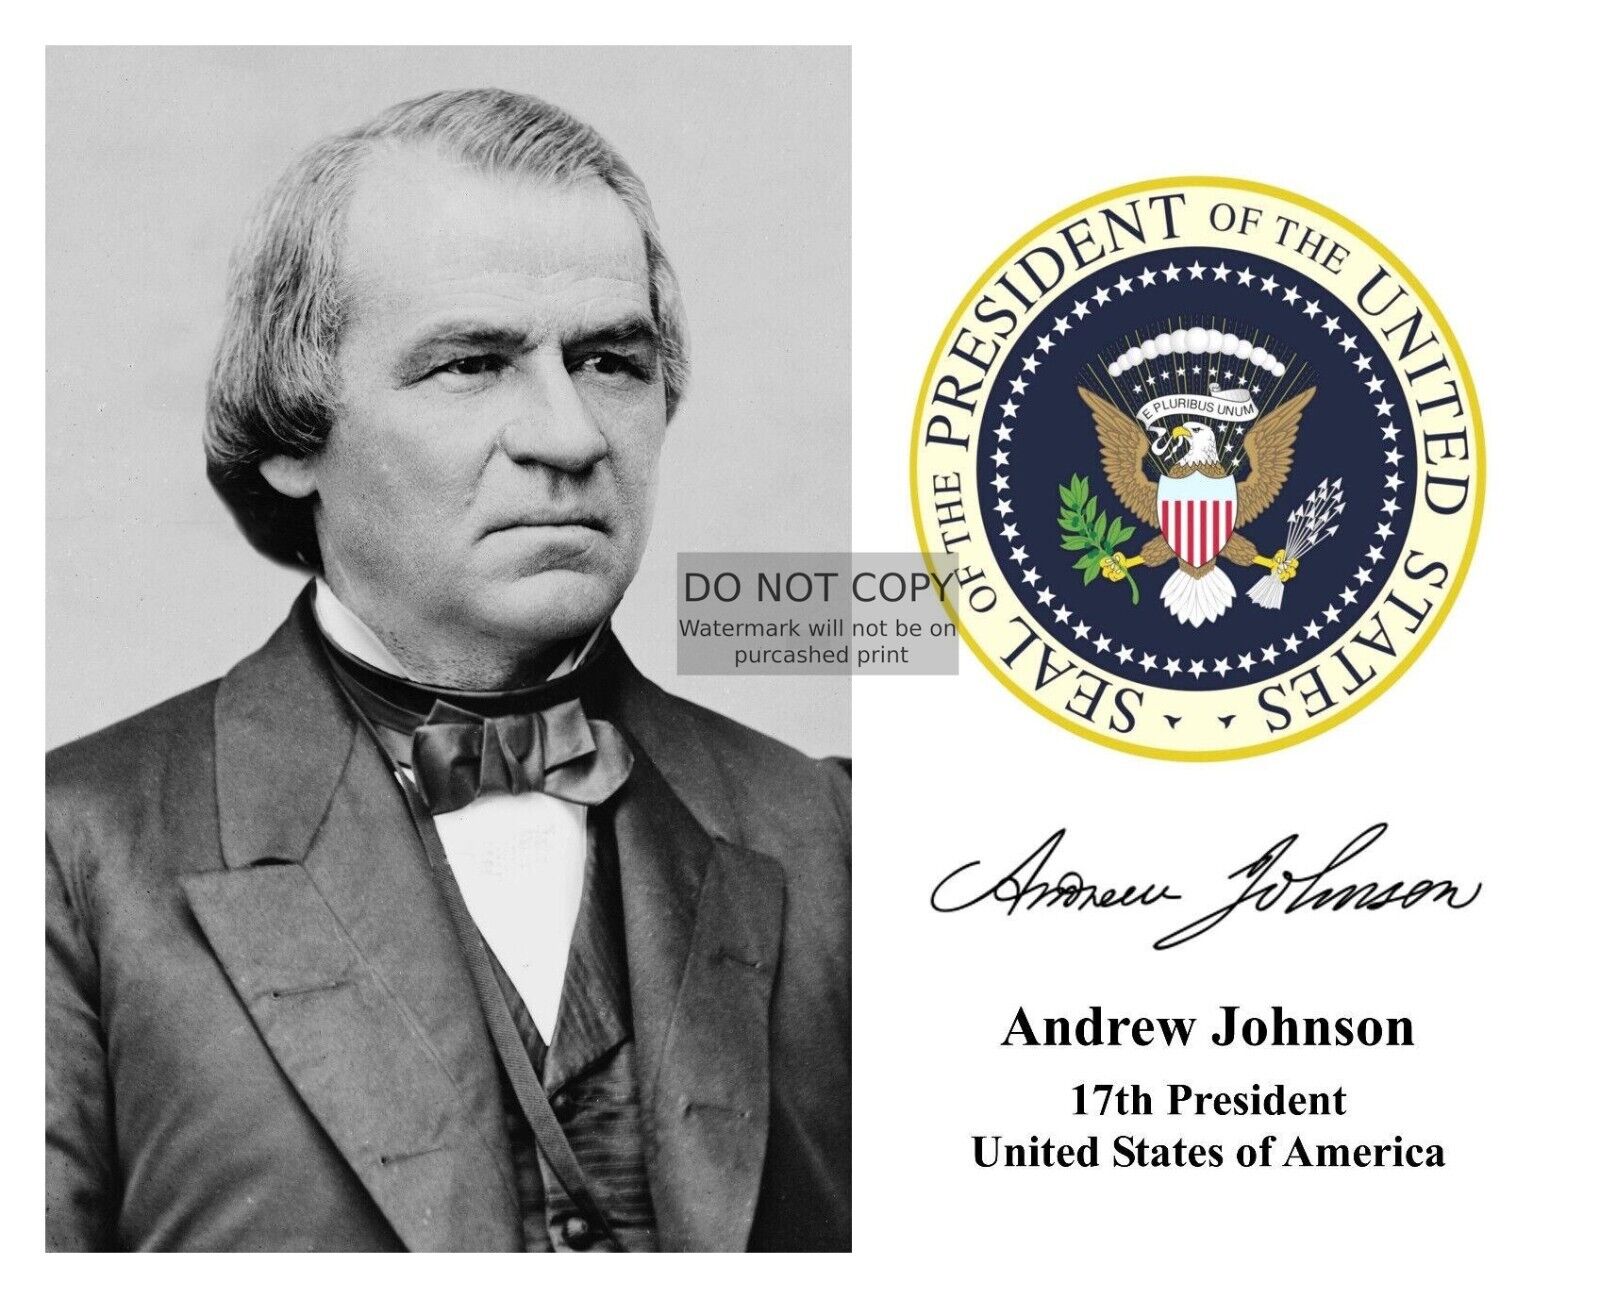 PRESIDENT ANDREW JOHNSON PRESIDENTIAL SEAL AUTOGRAPHED 8X10 PHOTOGRAPH